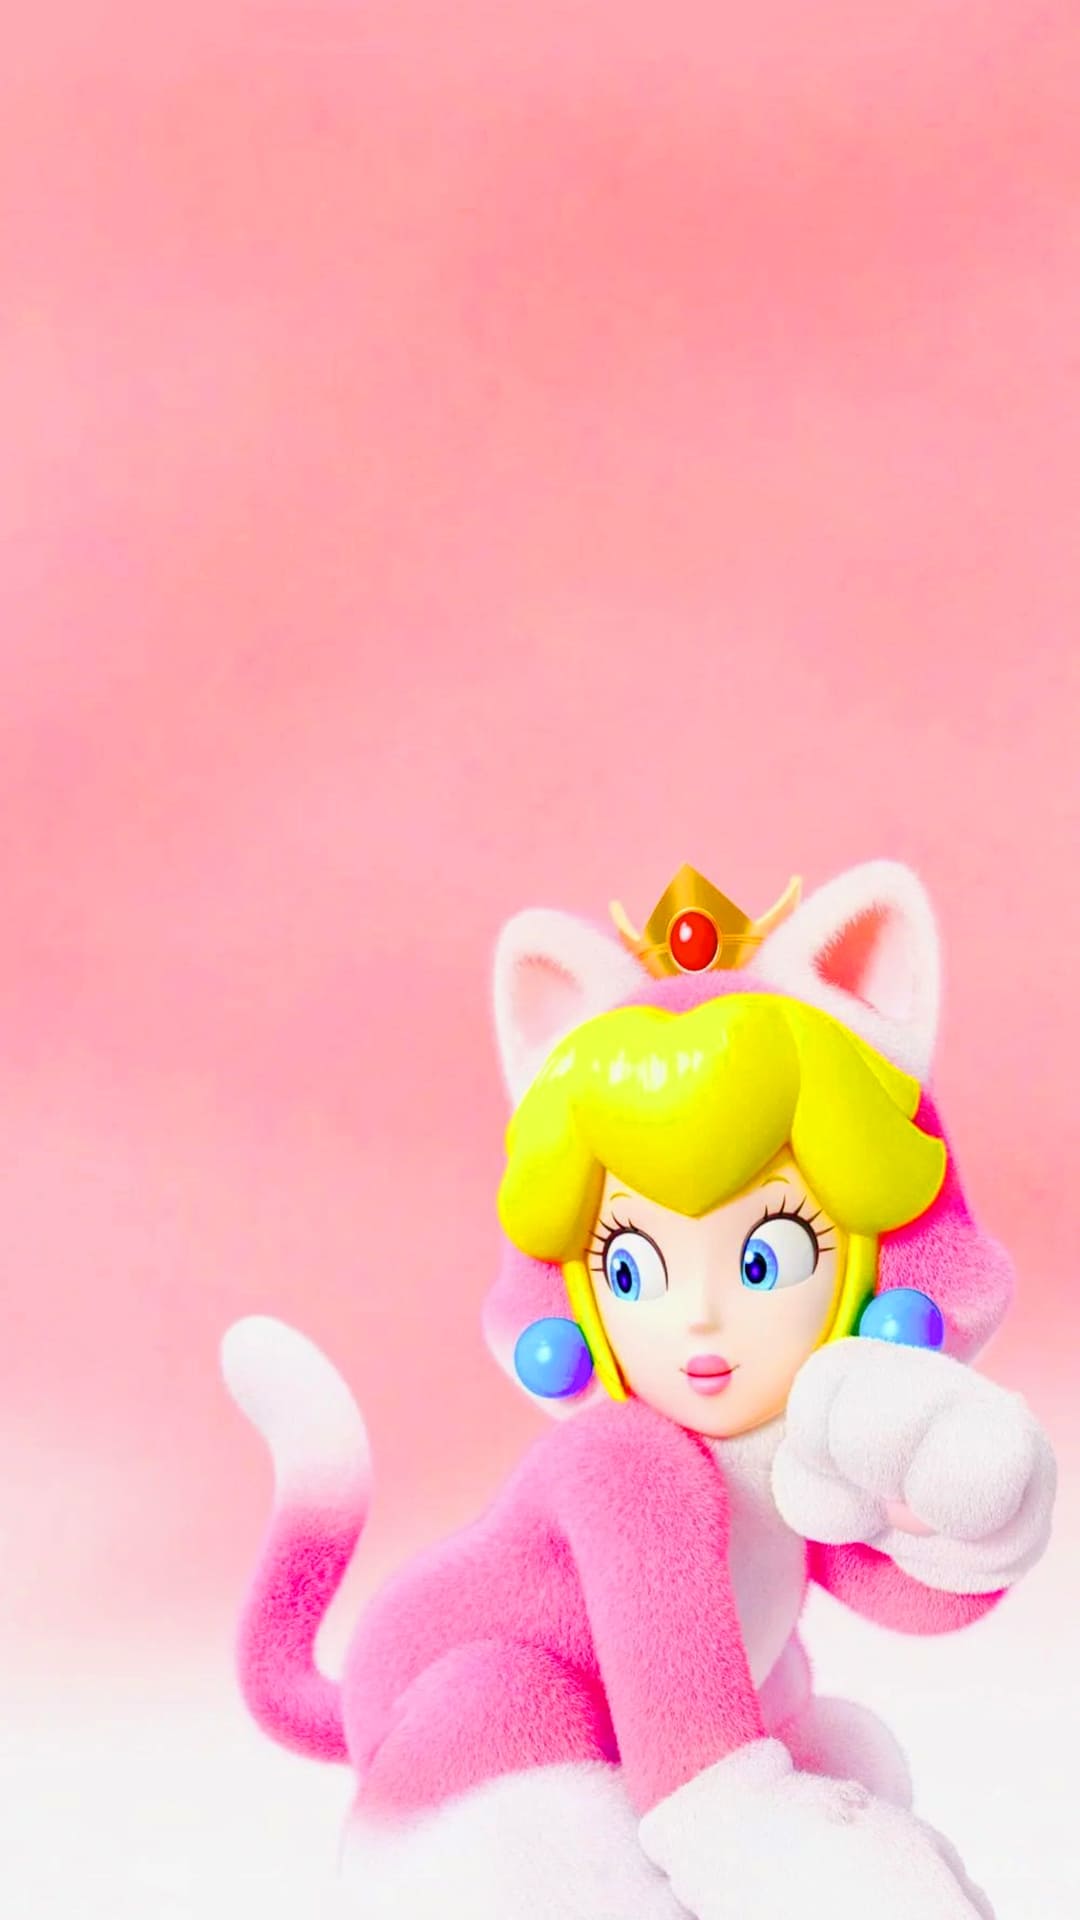 Princess Peach iPhone Wallpaper with high-resolution 1080x1920 pixel. You can use this wallpaper for your iPhone 5, 6, 7, 8, X, XS, XR backgrounds, Mobile Screensaver, or iPad Lock Screen - Princess Peach